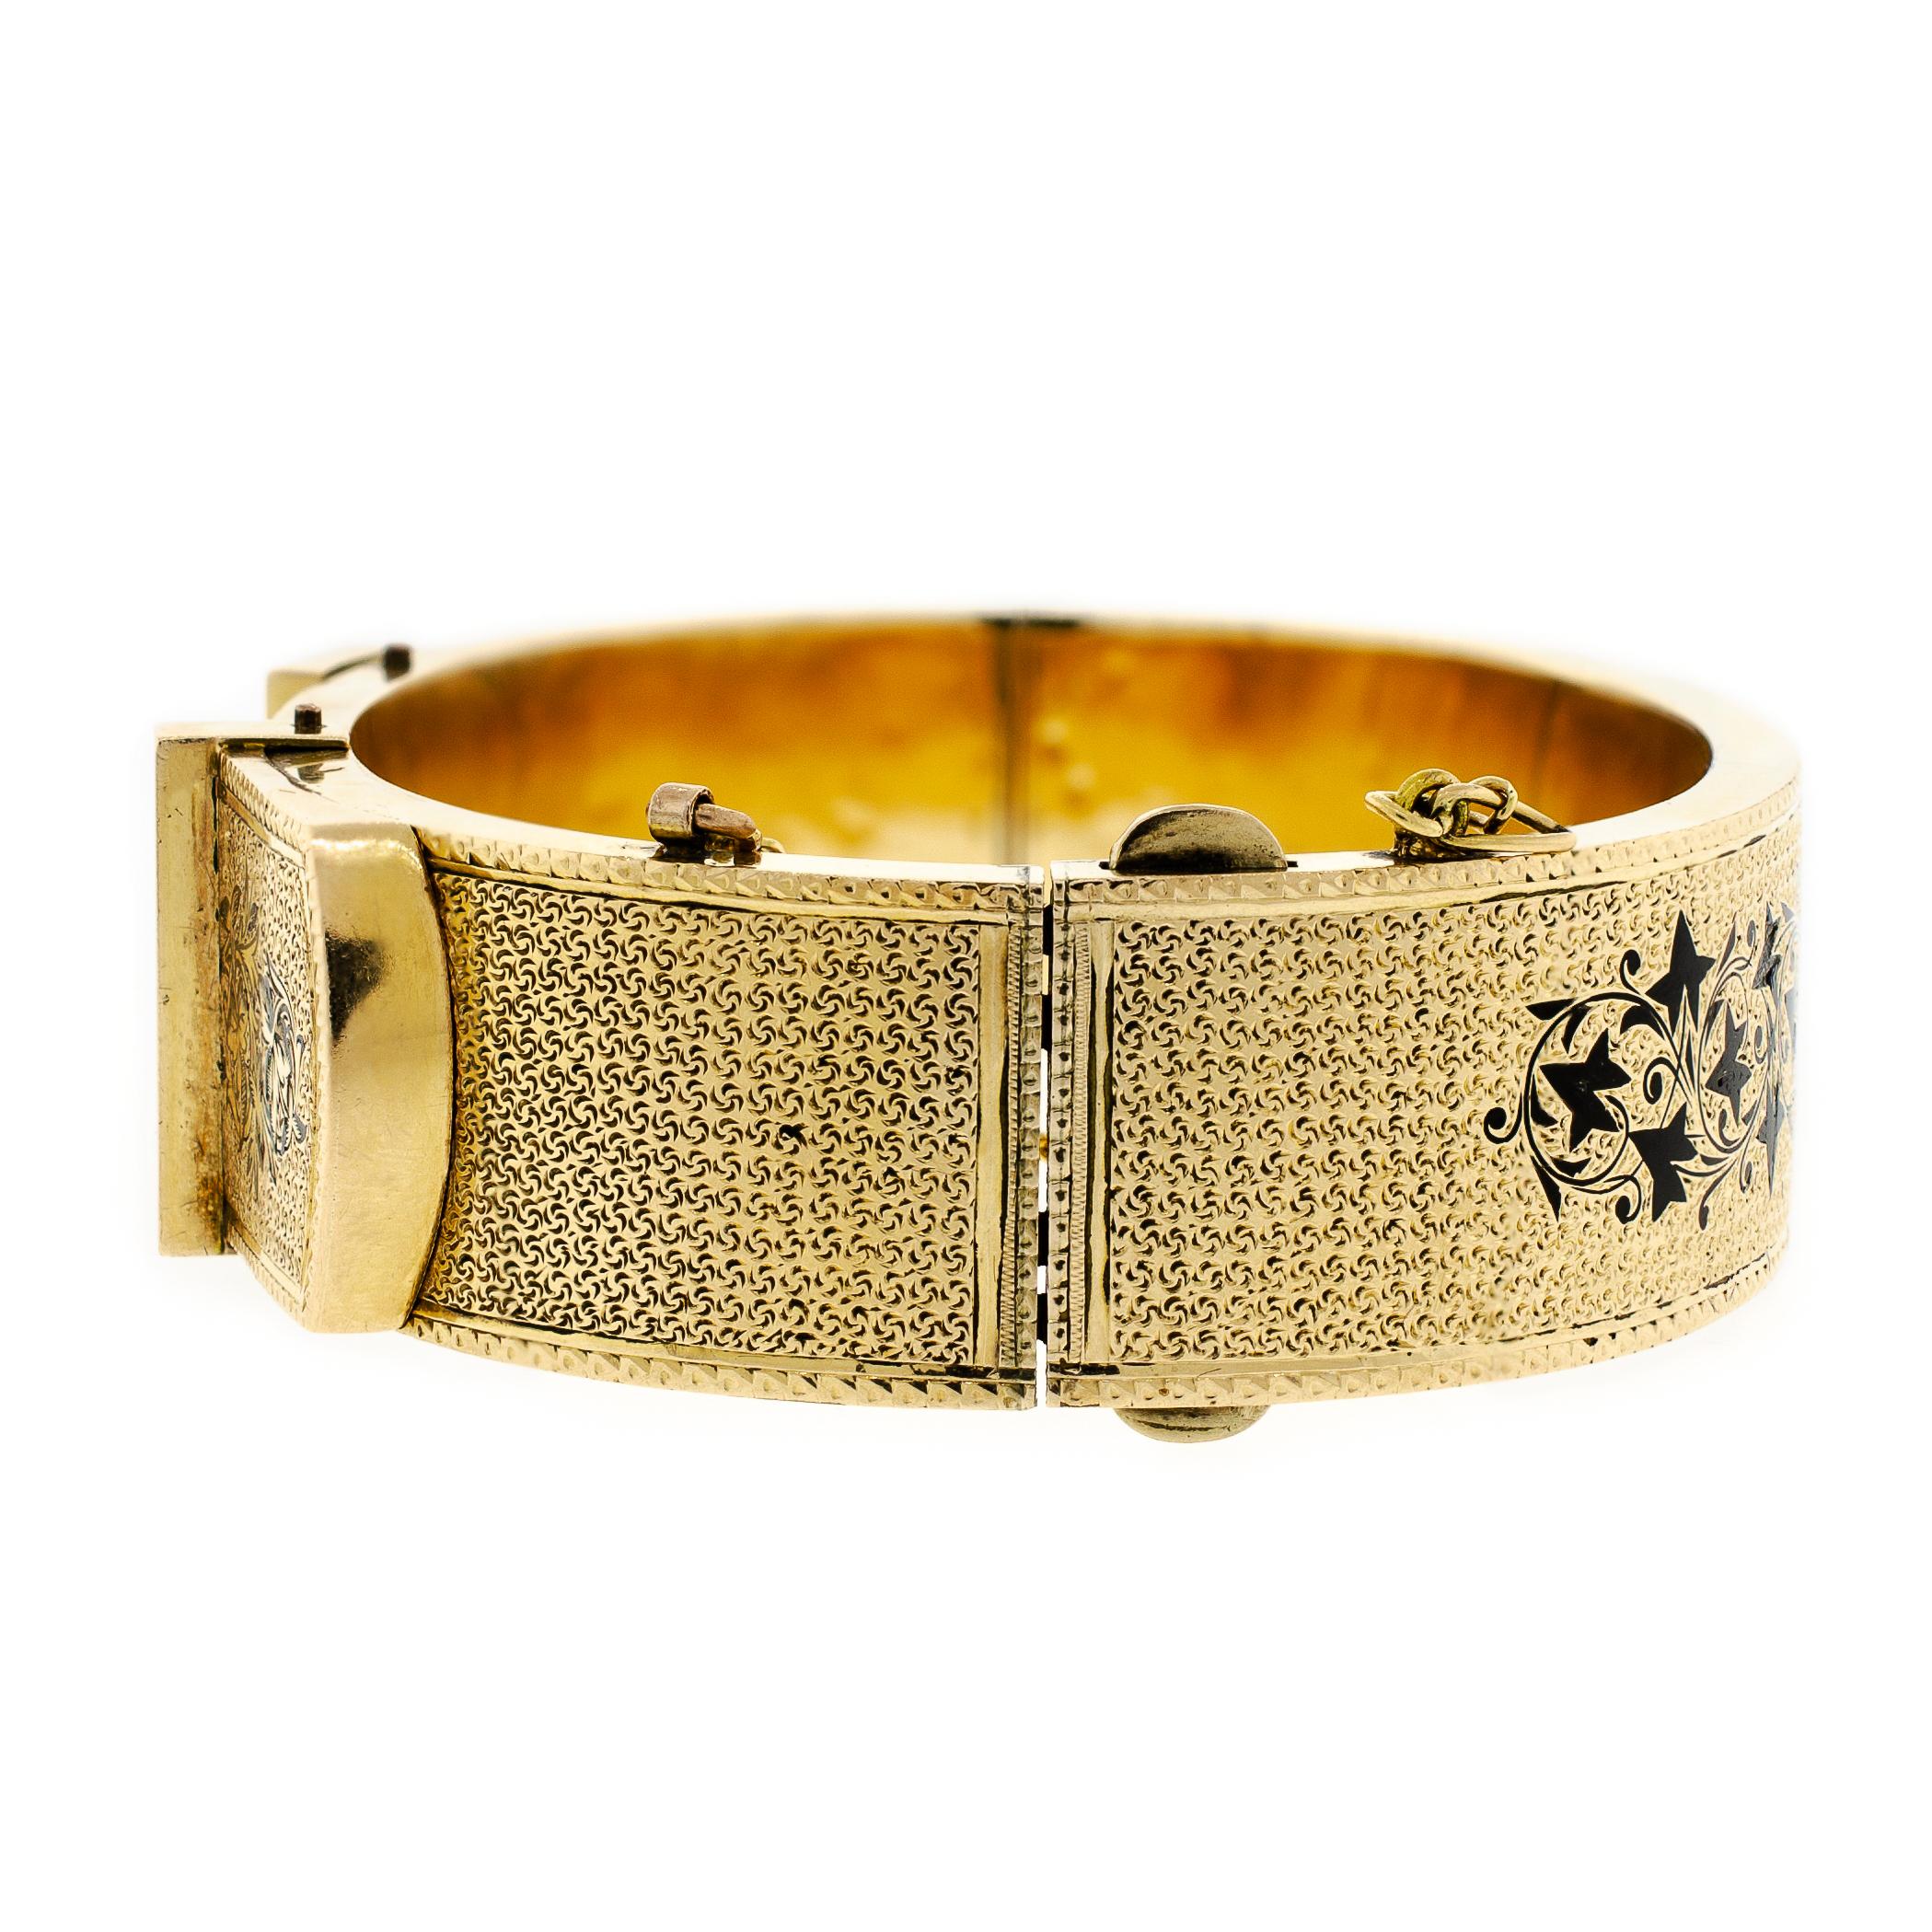 Stunning Victorian buckle motif yellow gold buckle stiff hinged bangle bracelet accented with black enamel detail stippled textured embossed foliate designs yellow gold safety chain hinged side clasp 3/4